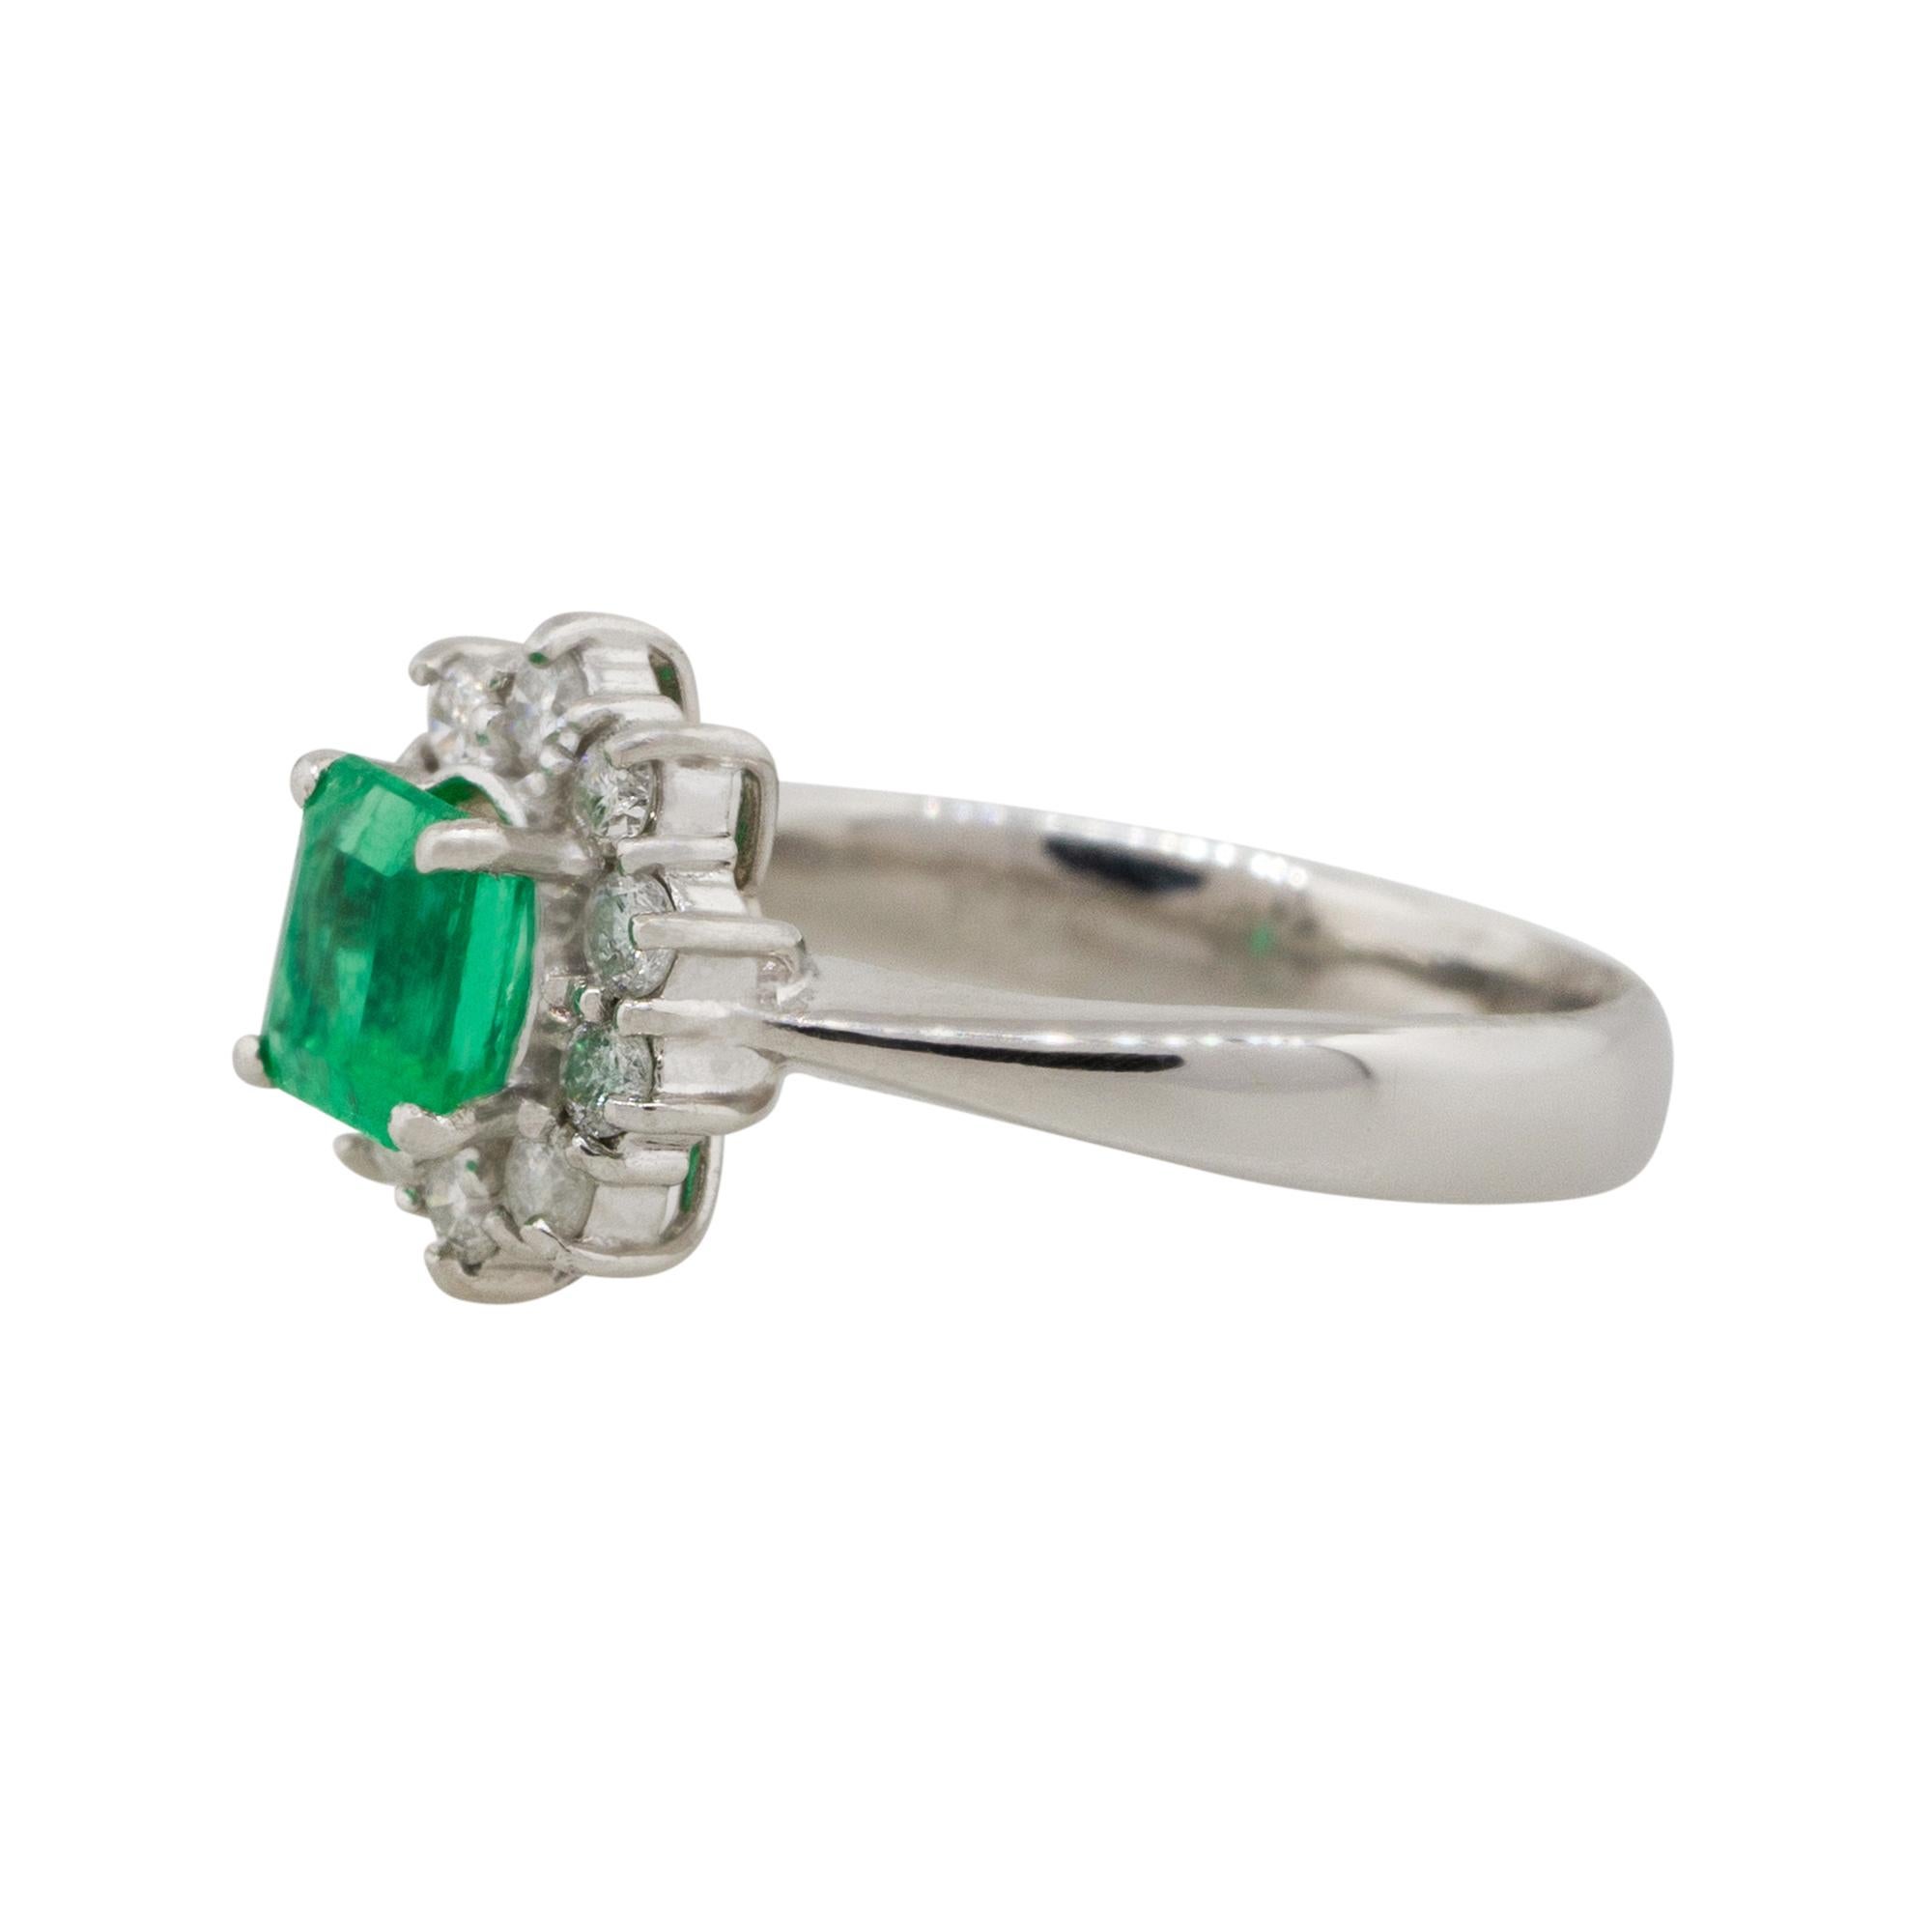 Material: Platinum
Gemstone details: Approx. 0.43ctw square shaped Emerald gemstone
Diamond details: Approx. 0.26ctw of round cut diamonds. Diamonds are G/H in color and VS in clarity
Ring Size: 5.75 
Ring Measurements: 0.55